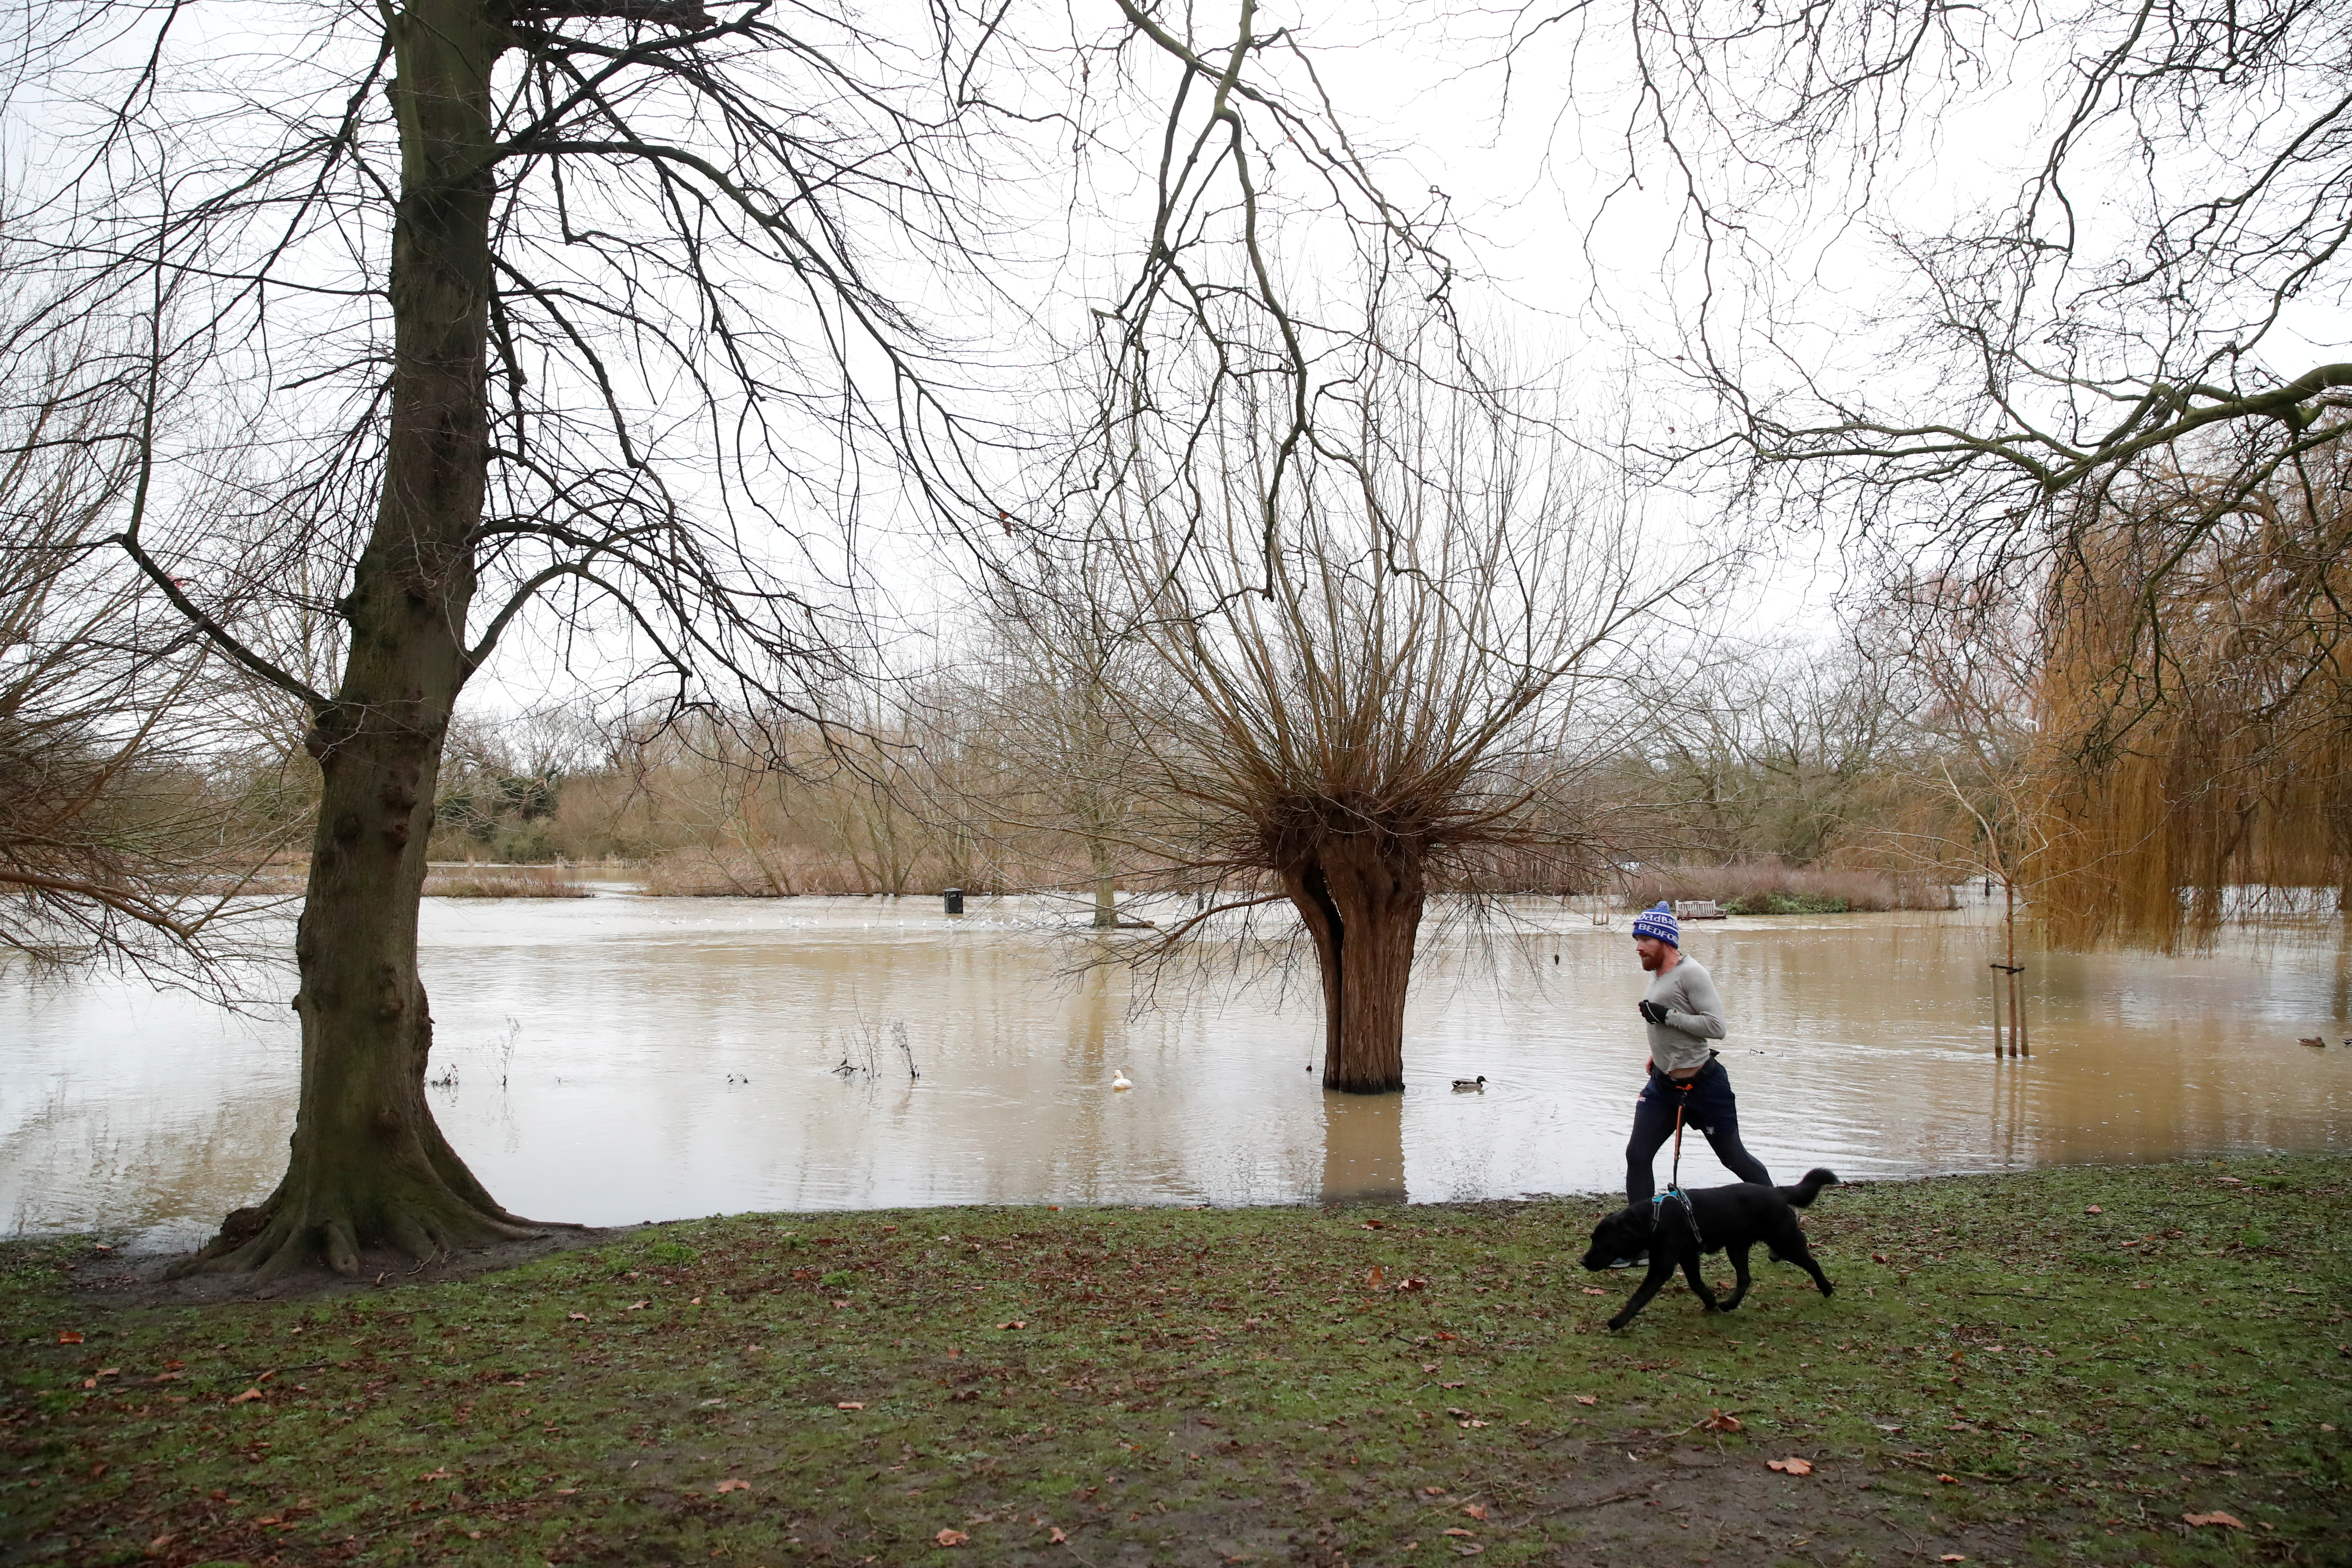 A man runs with his dog on the embankment of the River Great Ouse in Bedford, Britain, December 26, 2020. REUTERS/Andrew Boyers/File Photo